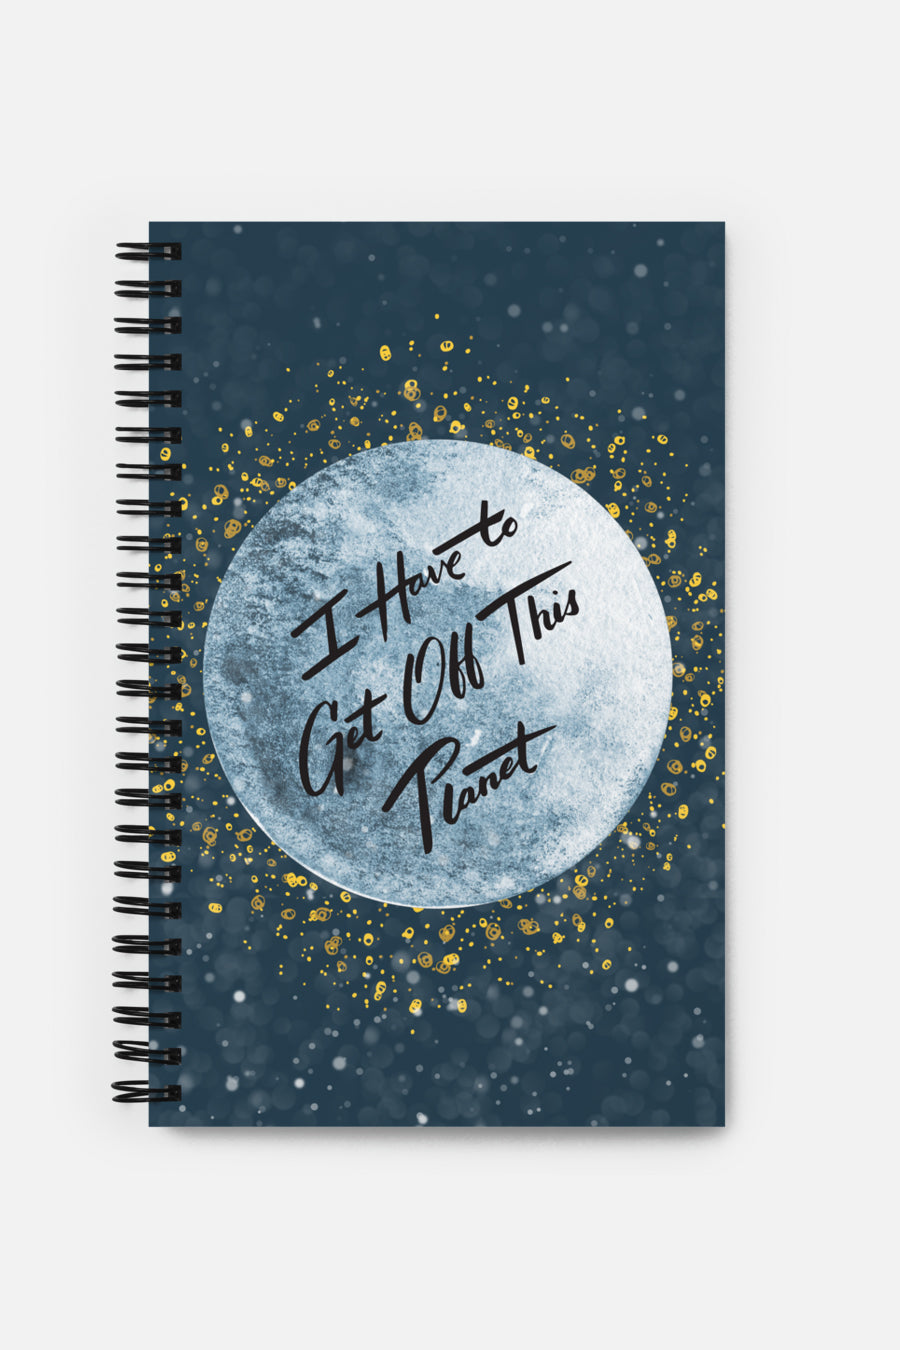 I Have to Get Off This Planet Spiral Notebook